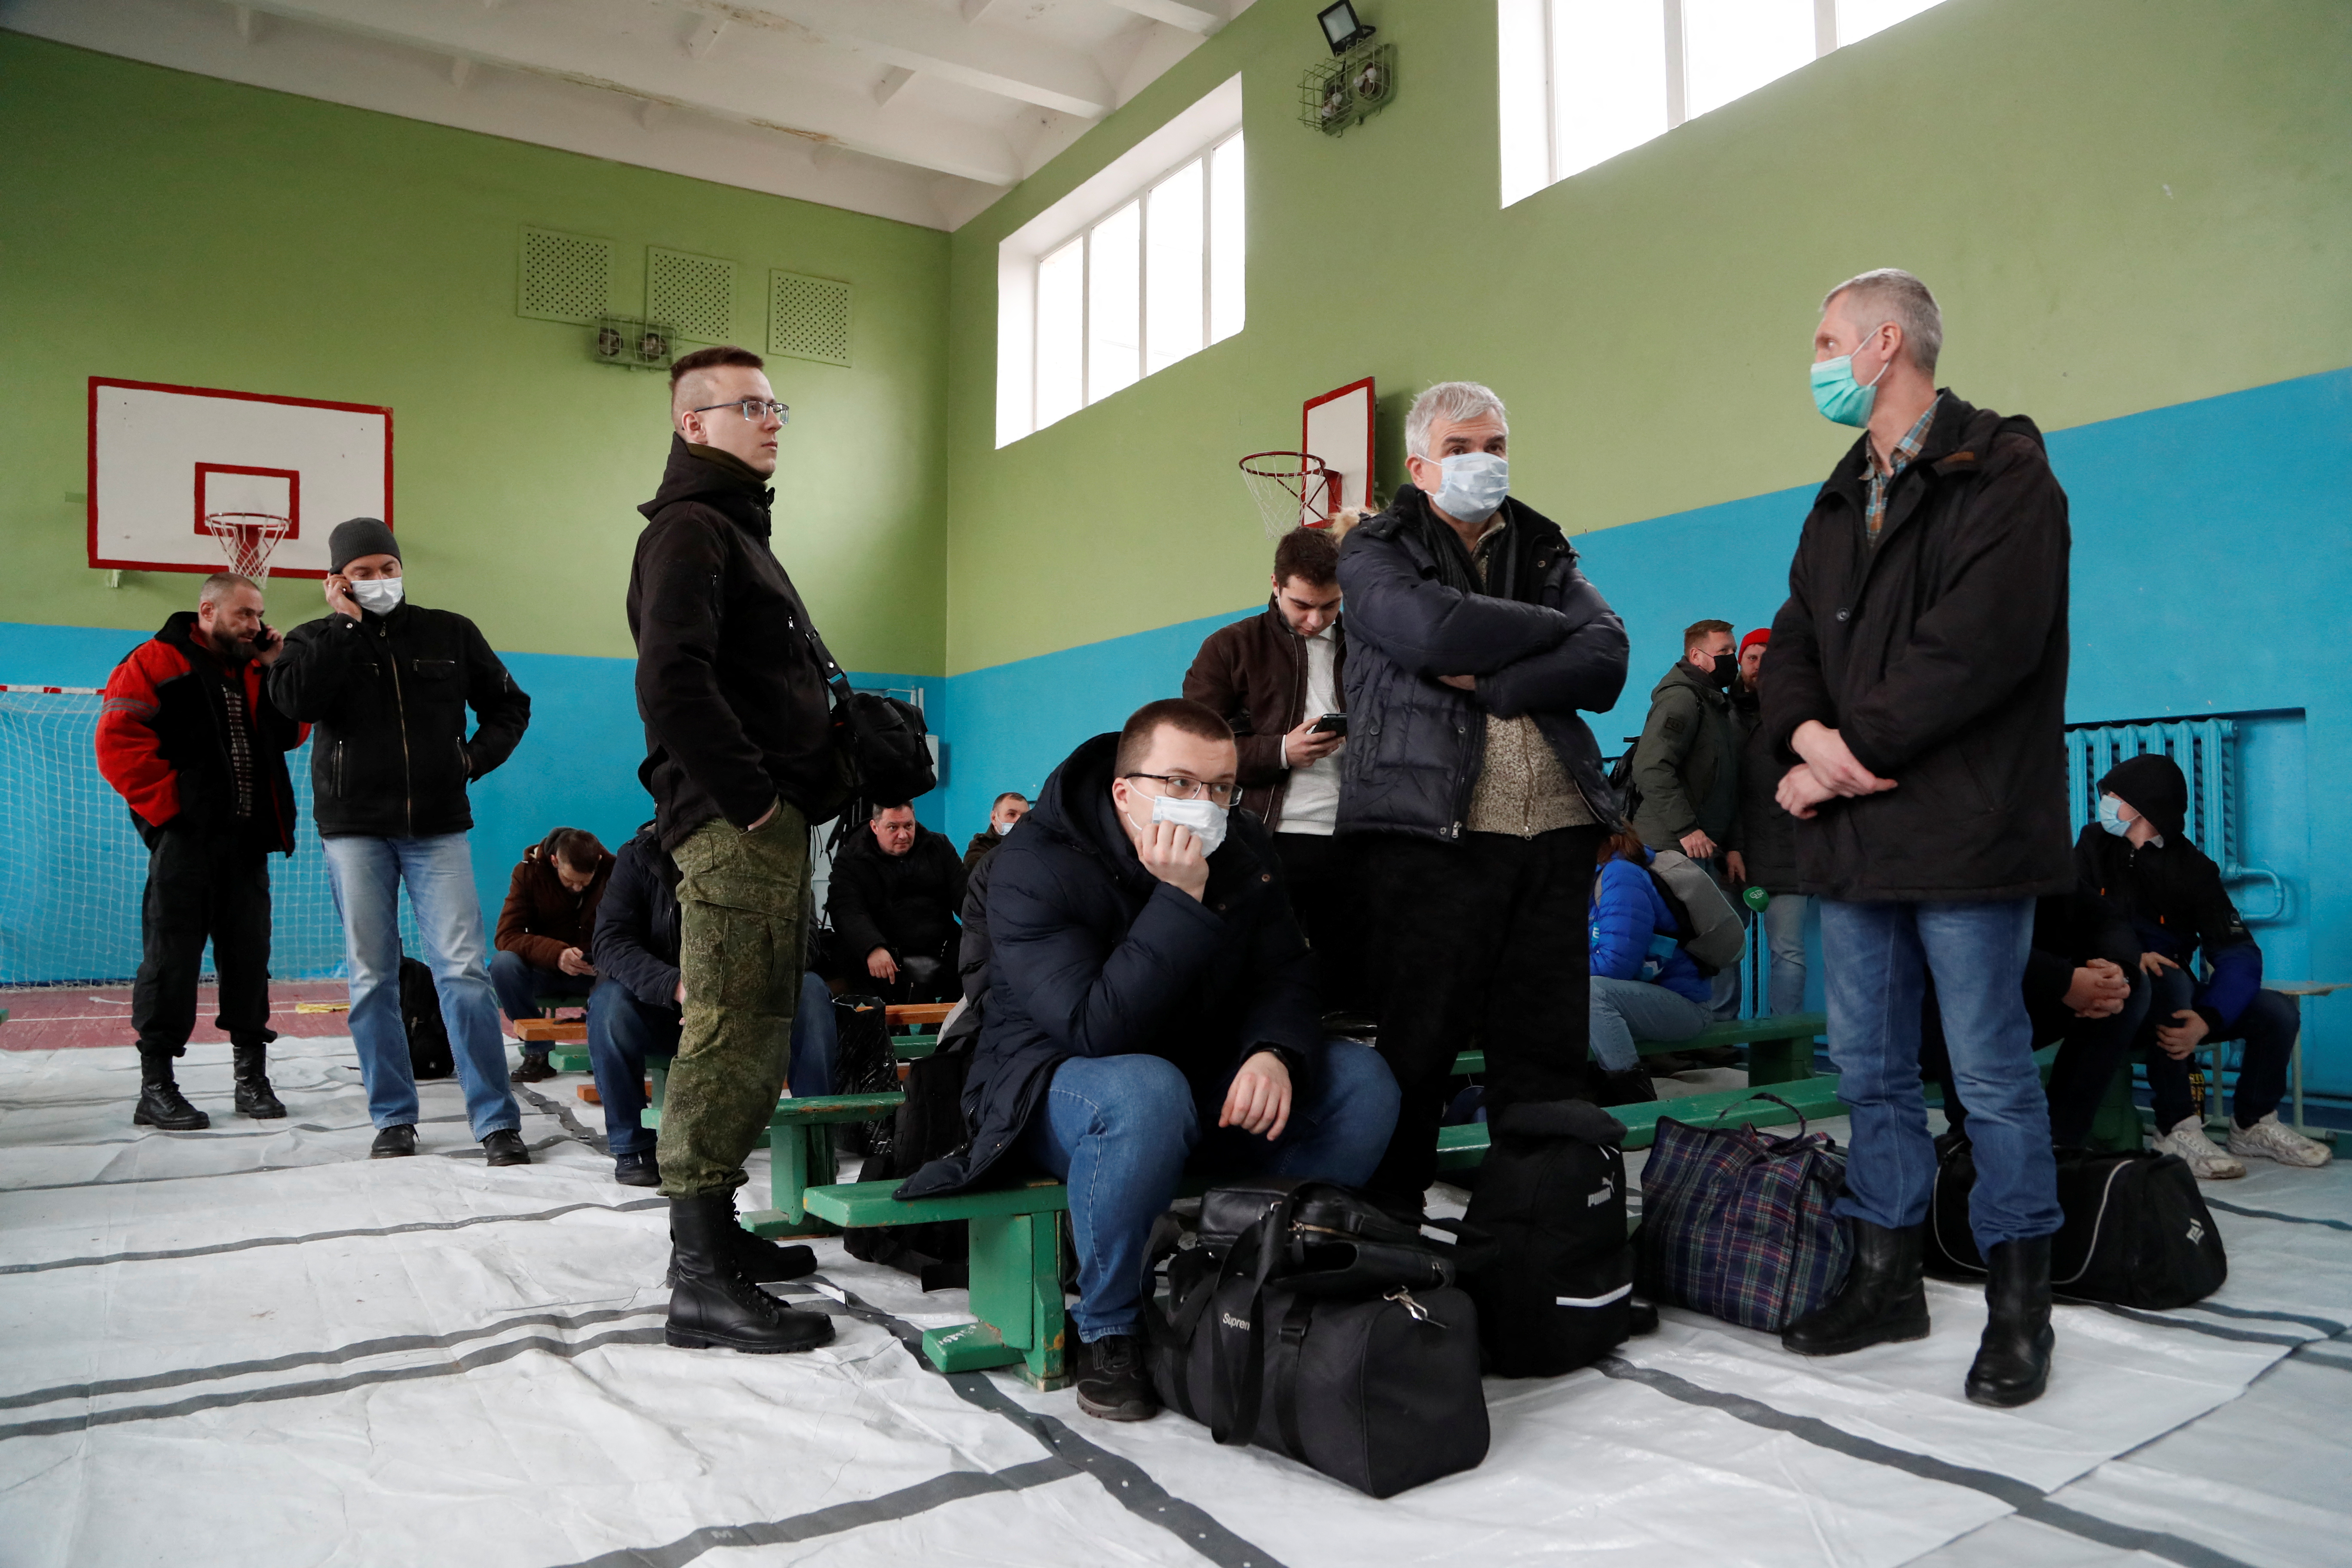 Men gather at a military mobilization point opened in a school in Donetsk